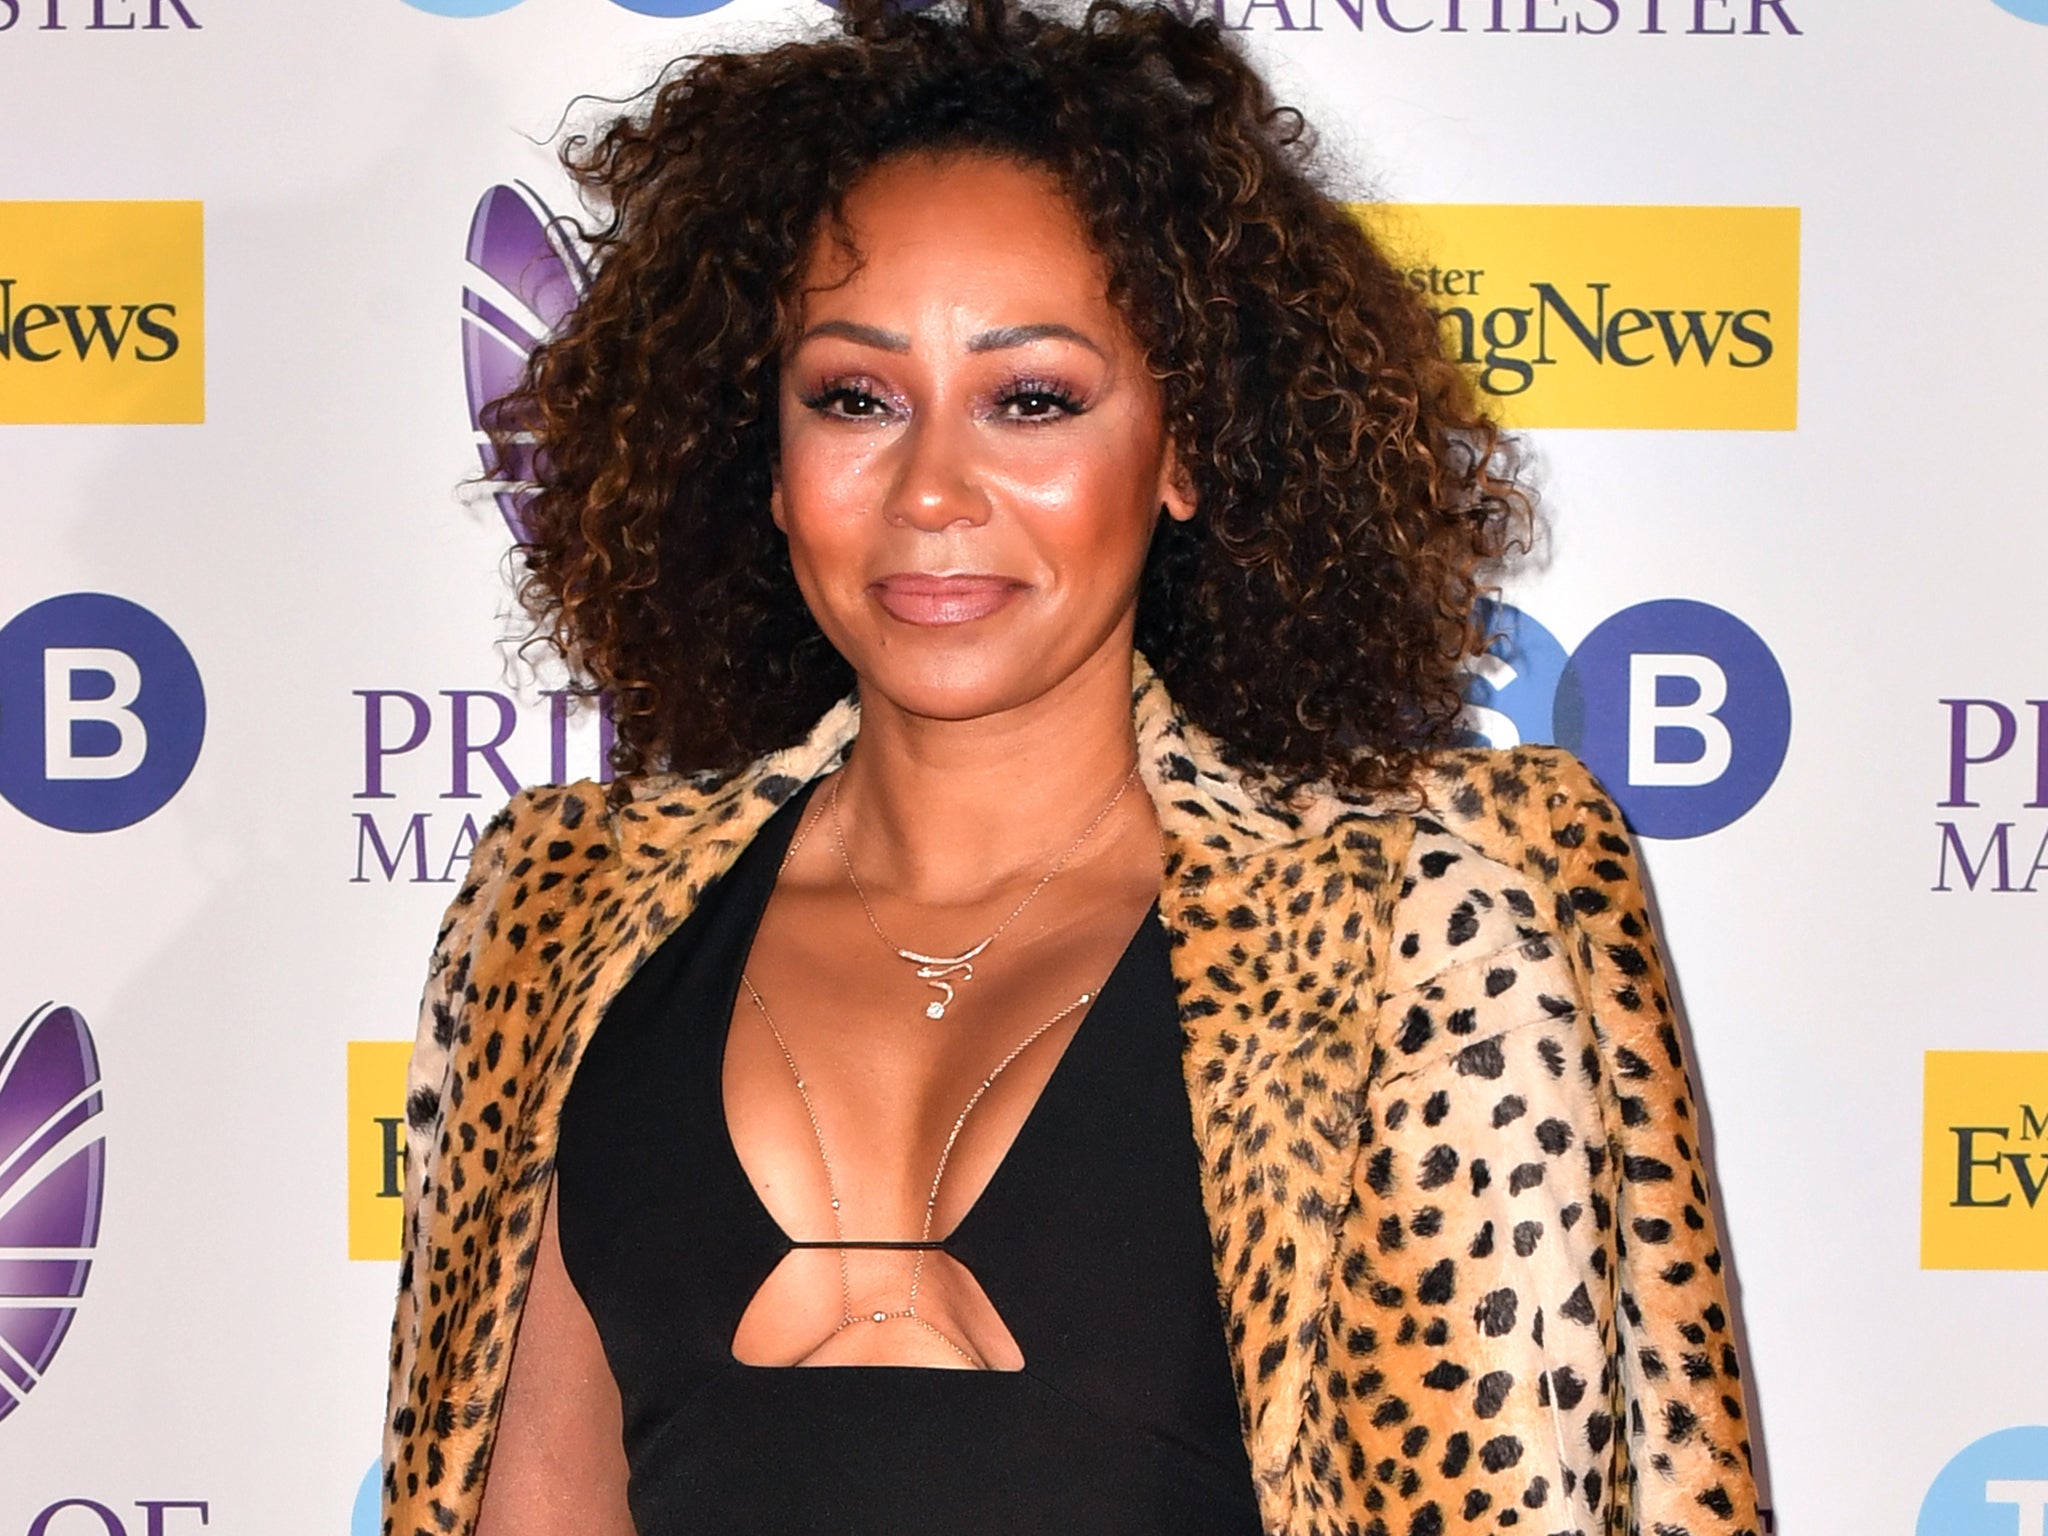 Melanie Brown won five Brit Awards during her time with the Spice Girls